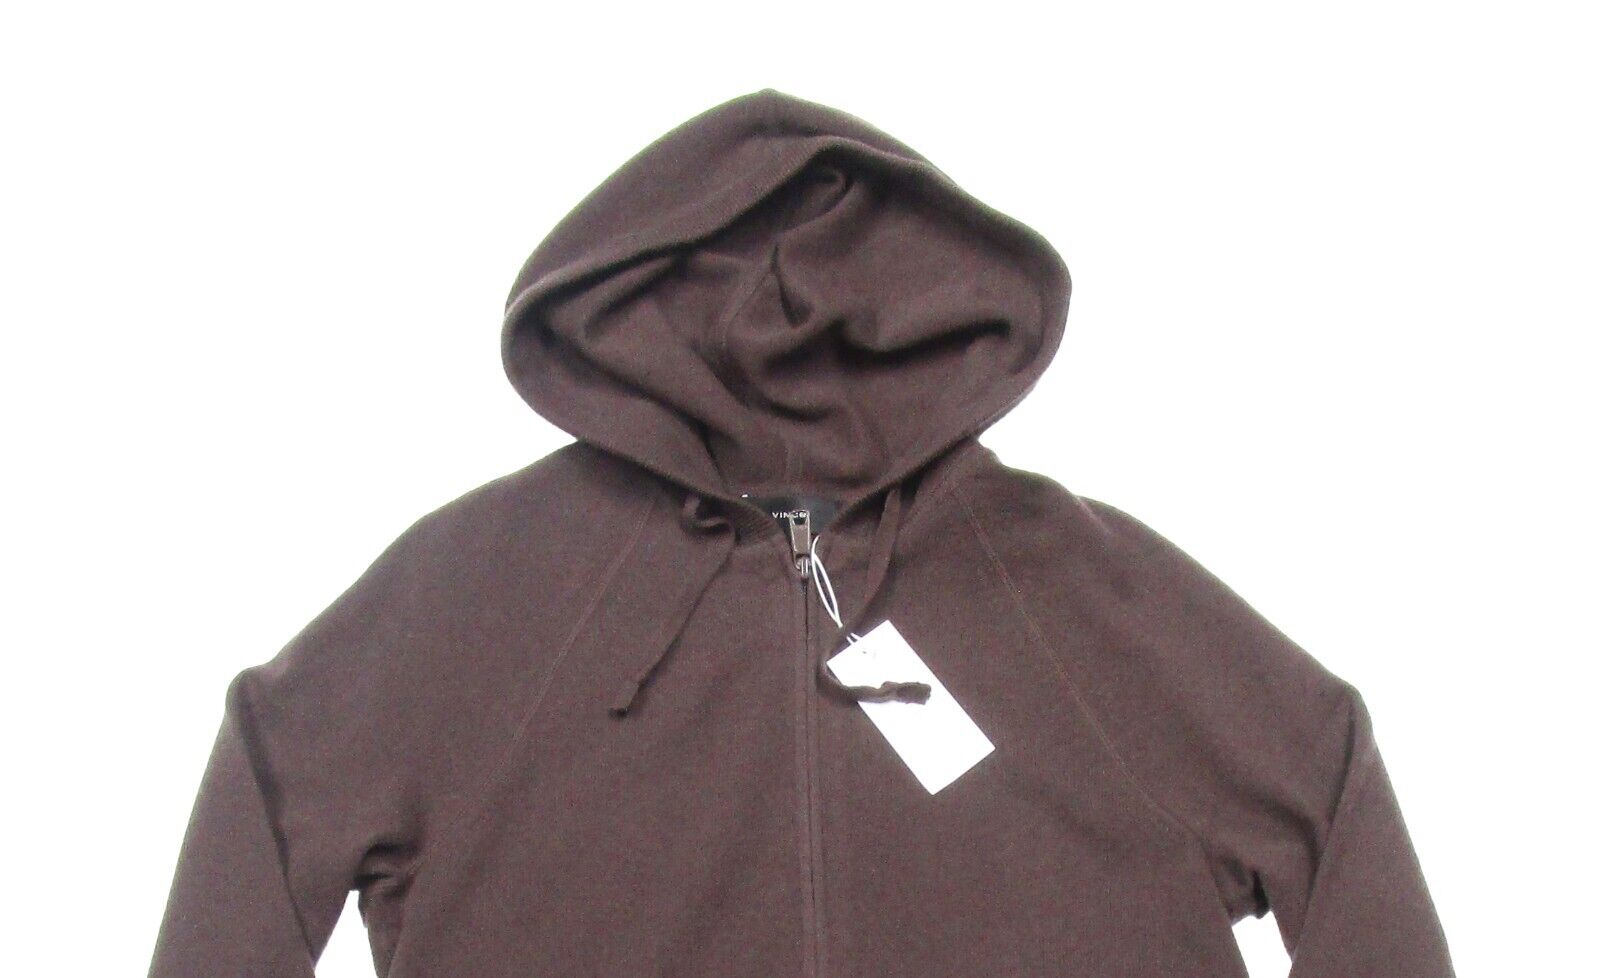 Pre-owned Vince Men's Brown Wool Cashmere Full Zip Hooded Sweater $425